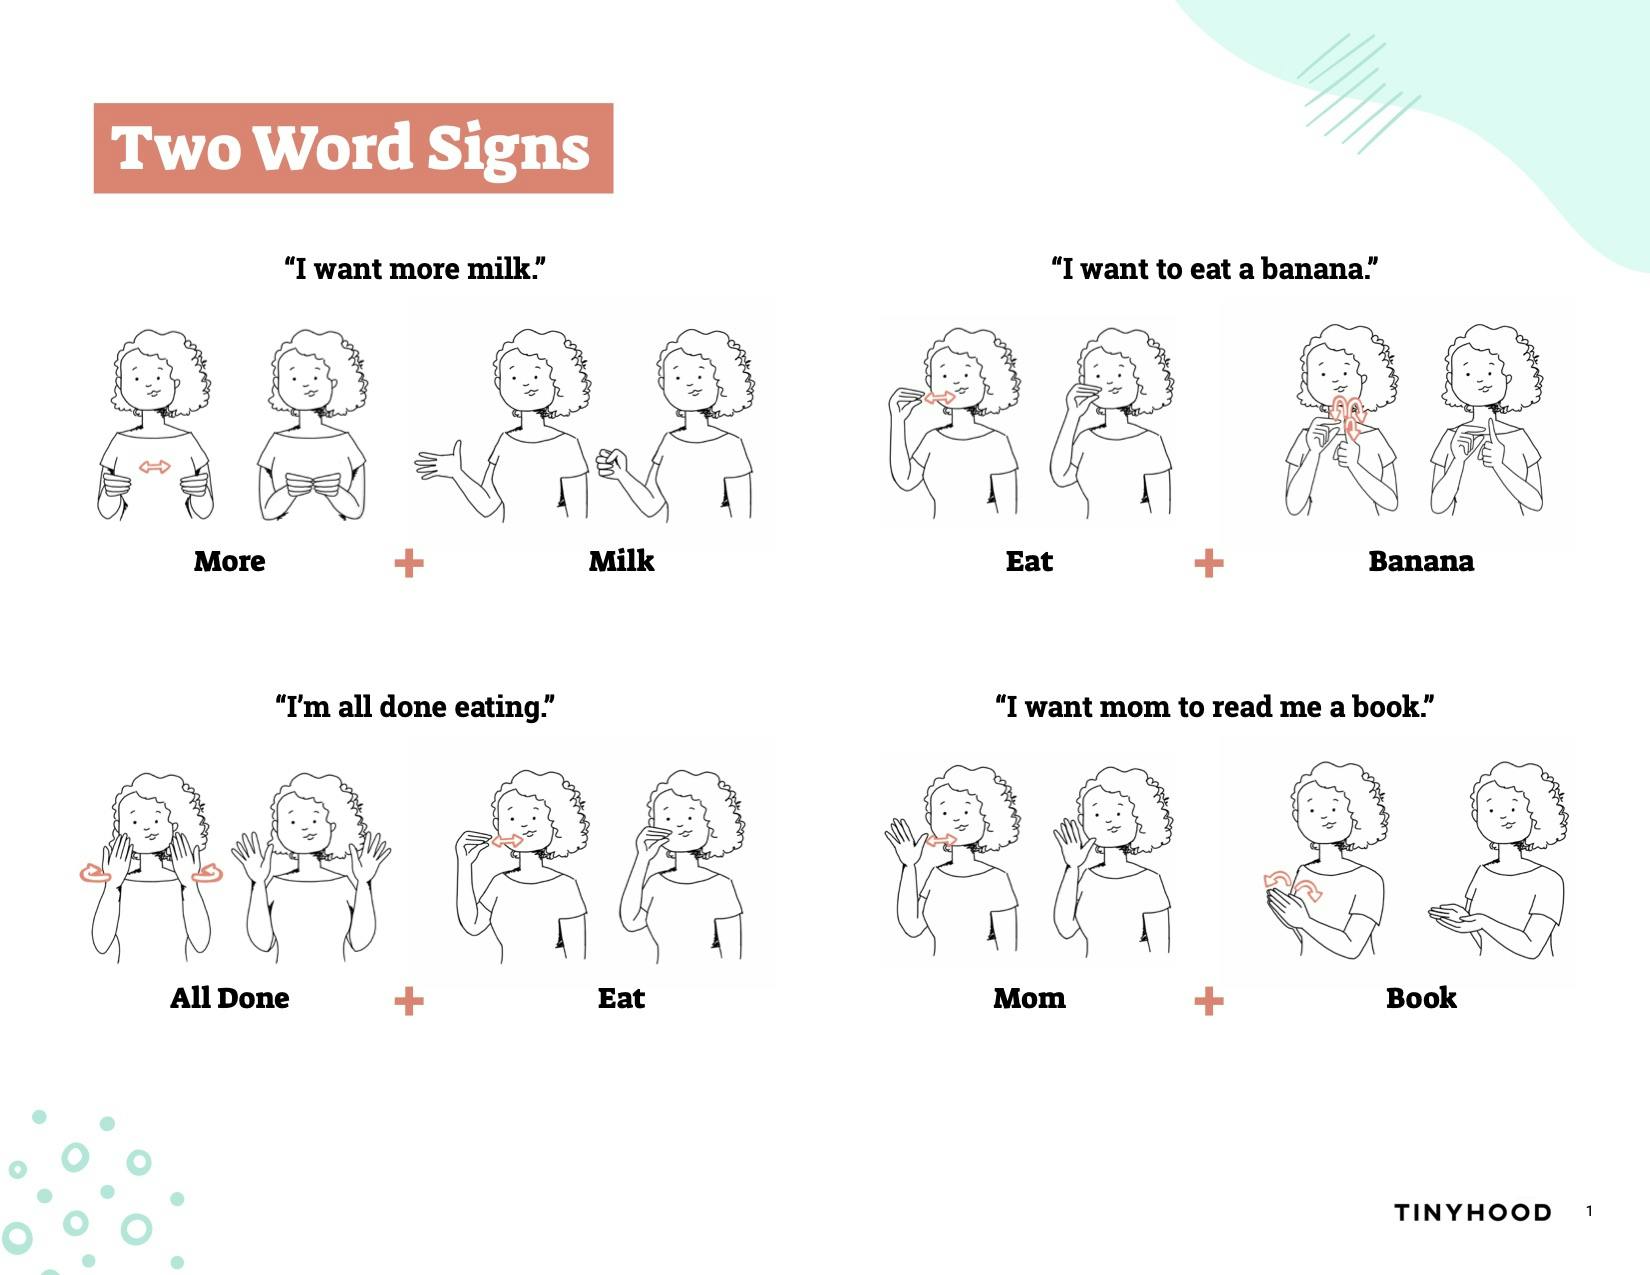 Preview image of Handout: Two Word Signs